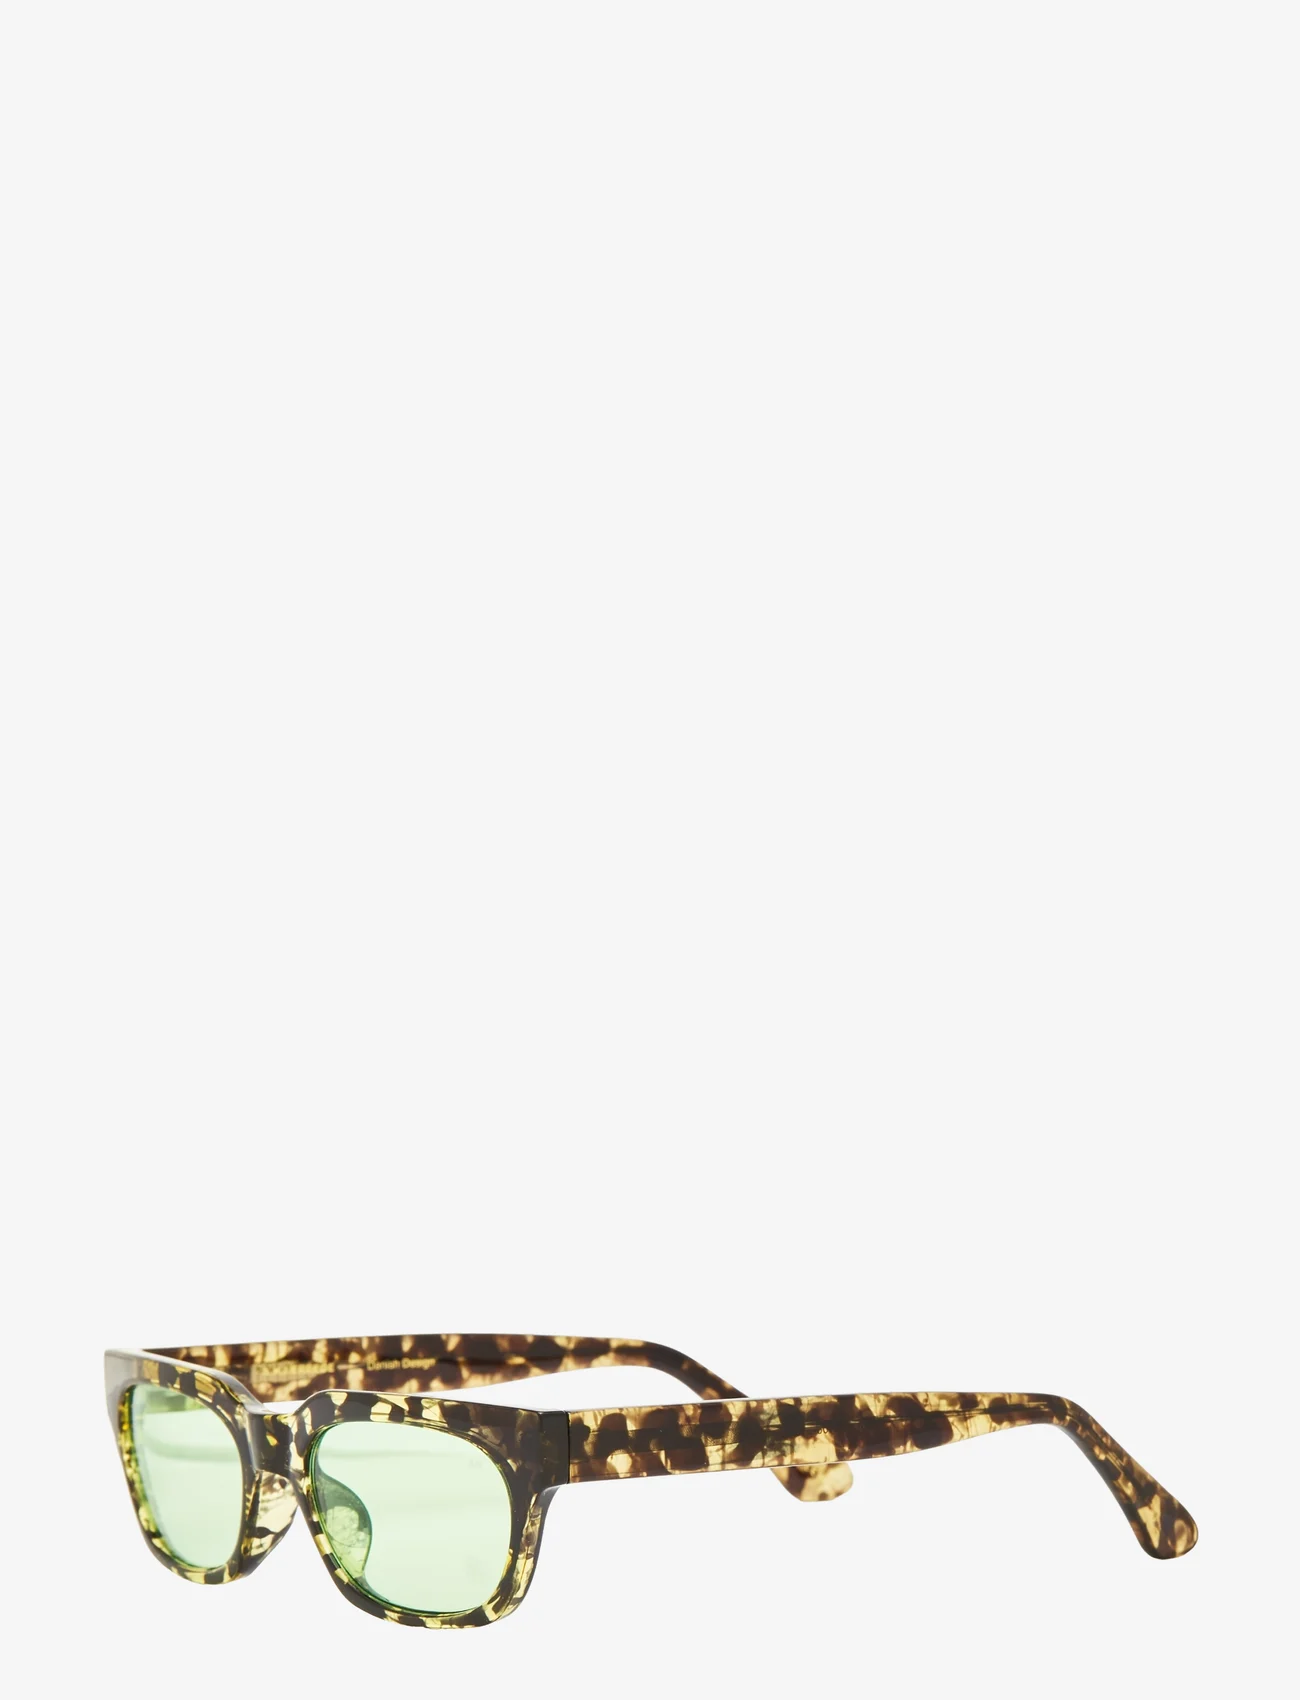 A.Kjærbede - Bror - lowest prices - black / yellow tortoise - 1